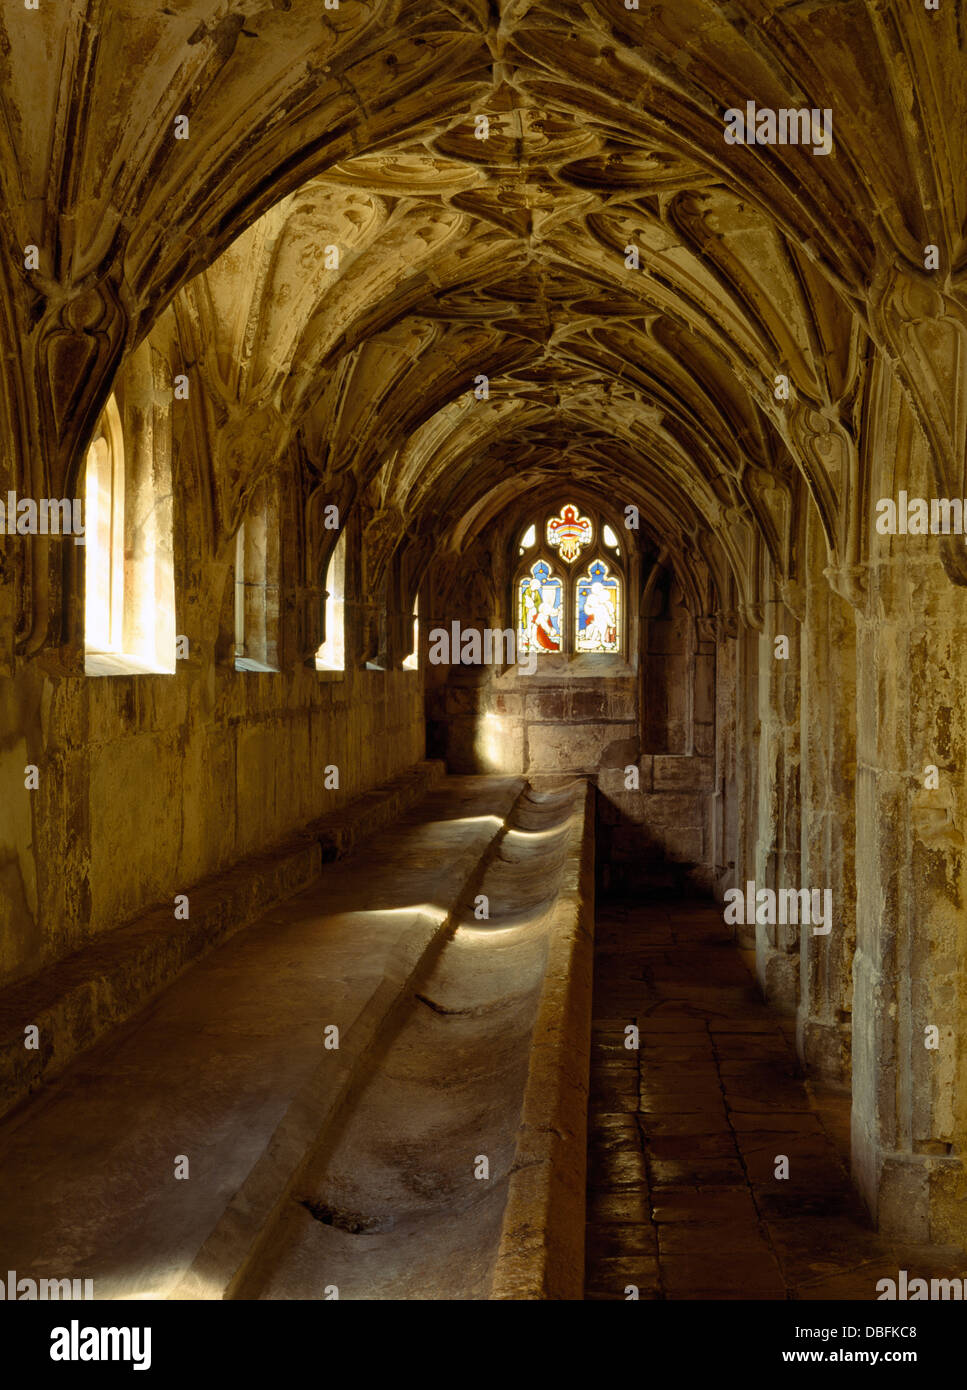 The lavatorium (washing place) in the N walk of the Great Cloister of Gloucester Cathedral, England, the former Benedictine abbey of St Peter. Stock Photo